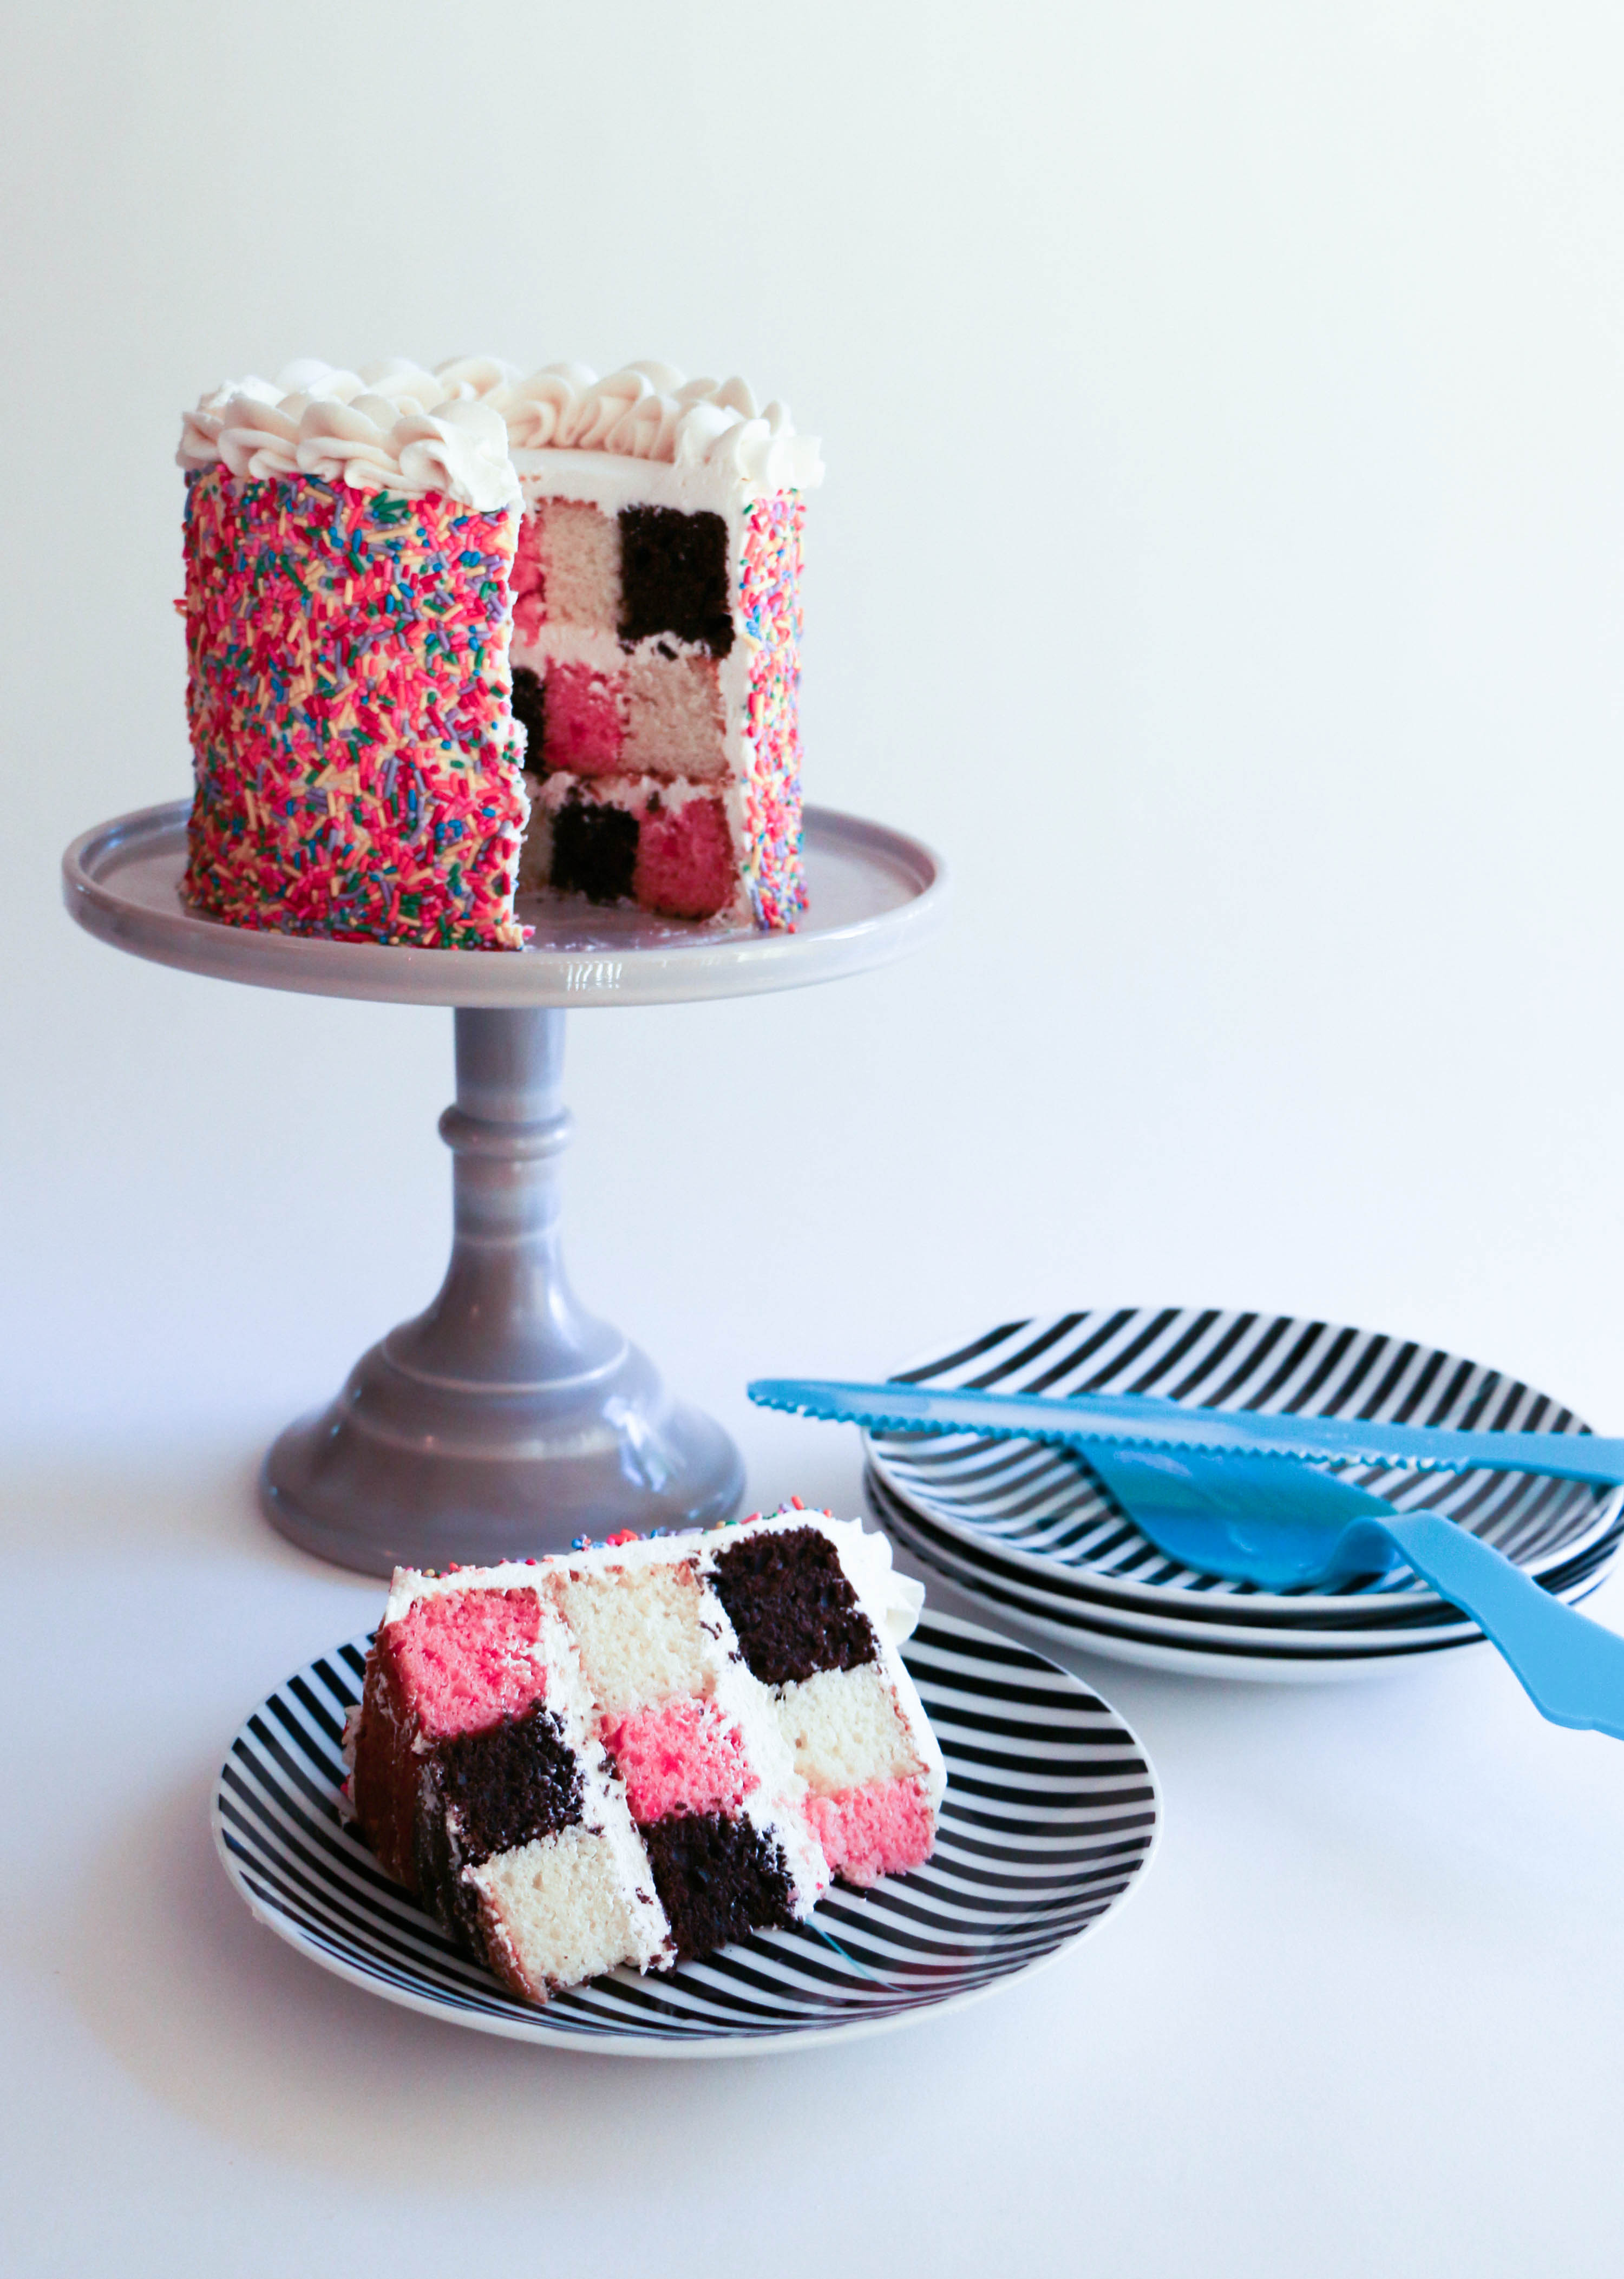 Make an impressive checkerboard cake with the pans you already have at home